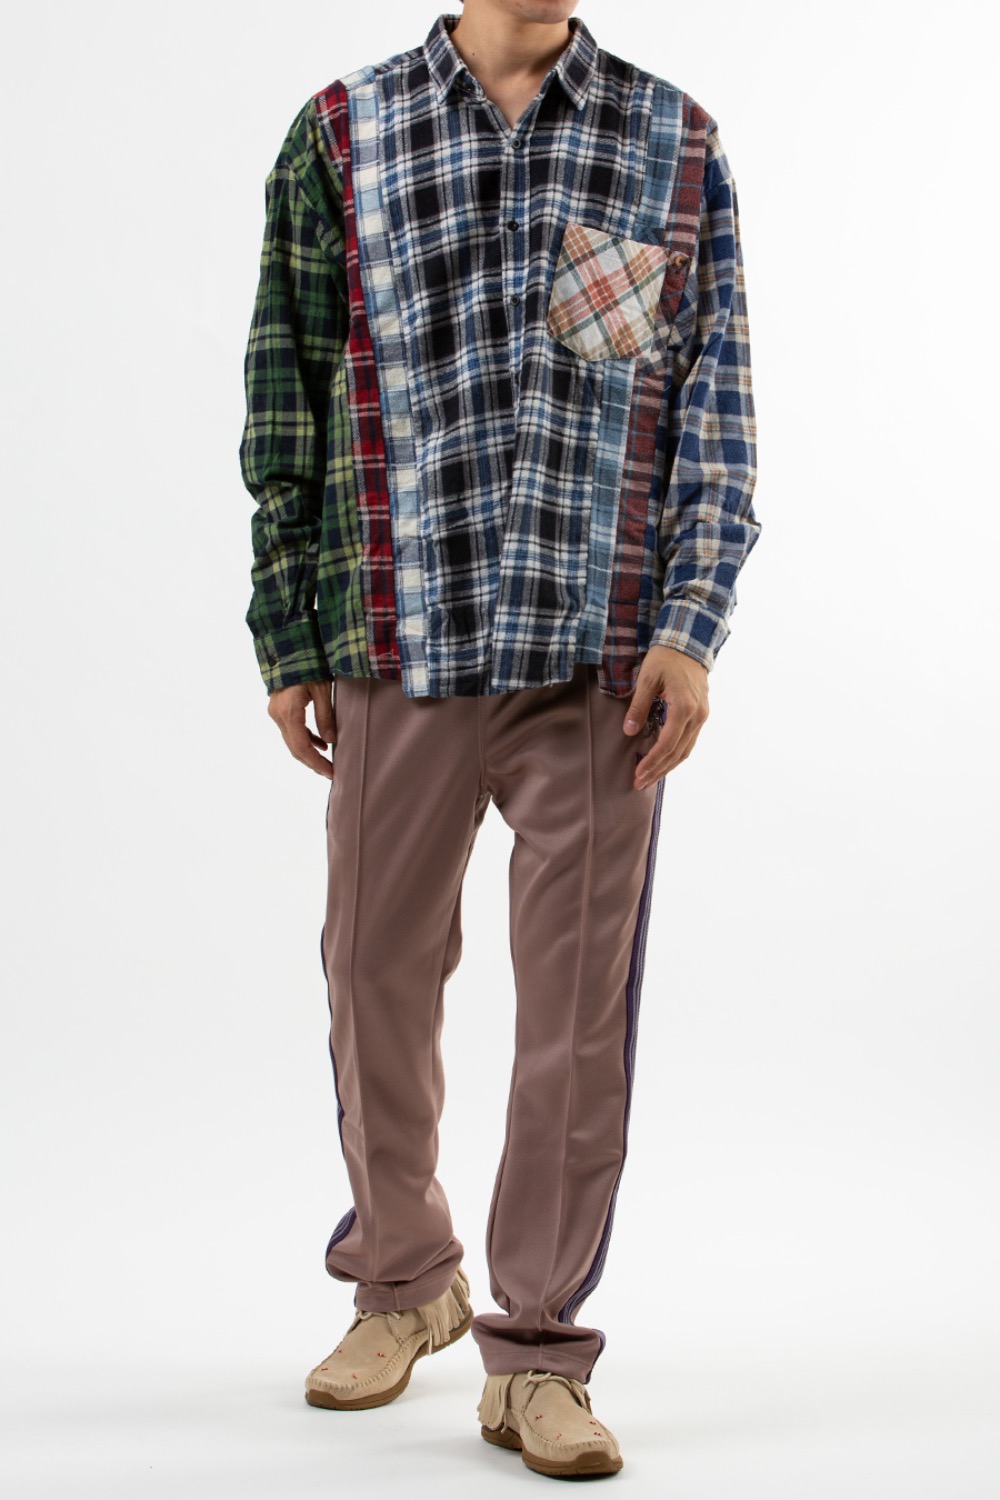 (22FW) - LQ306 Rebuild by Needles Flannel Shirt -&gt; 7 Cuts Wide Shirt (FREE - 9) ASSORTED